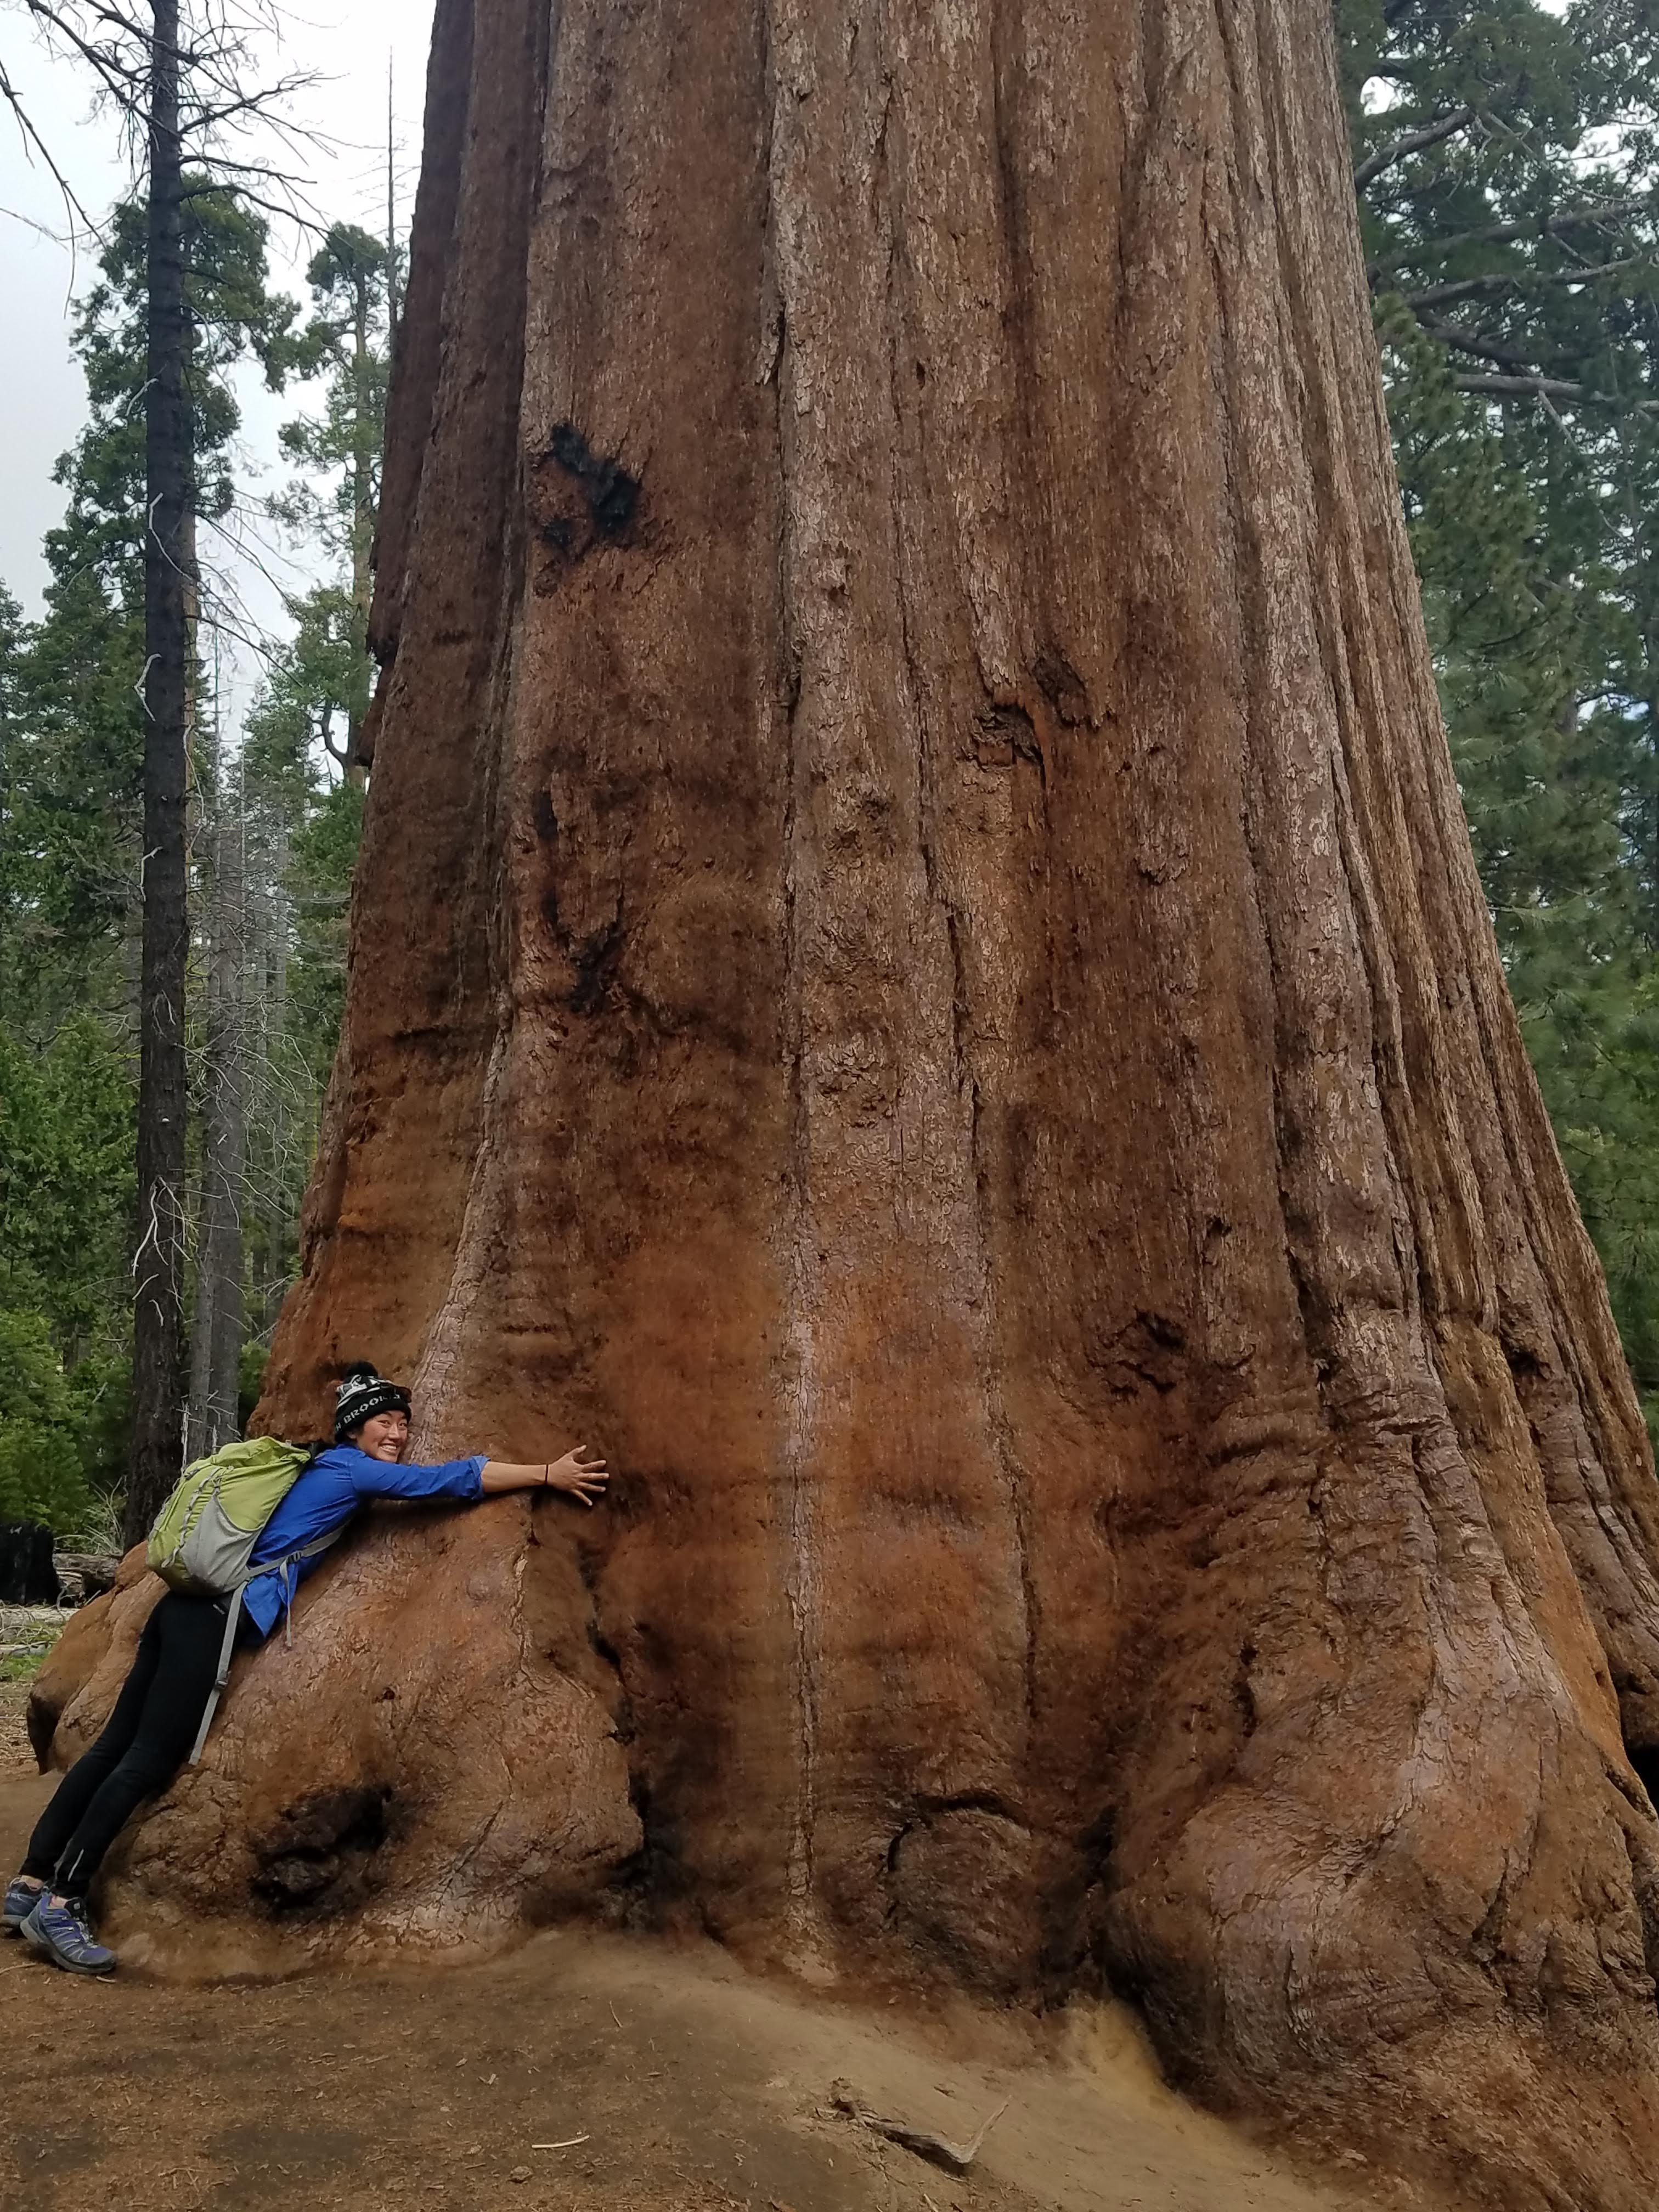 We saw coastal redwoods in Big Sur, and now we've seen their cousins, the Giant Sequoias, in Mariposa Grove in Yosemite! I stand corrected-- in the Big Sur post, I said Coastal Redwoods were shorter. Coastal Redwoods are, in fact, taller, but the Giant Sequoias are larger by mass!